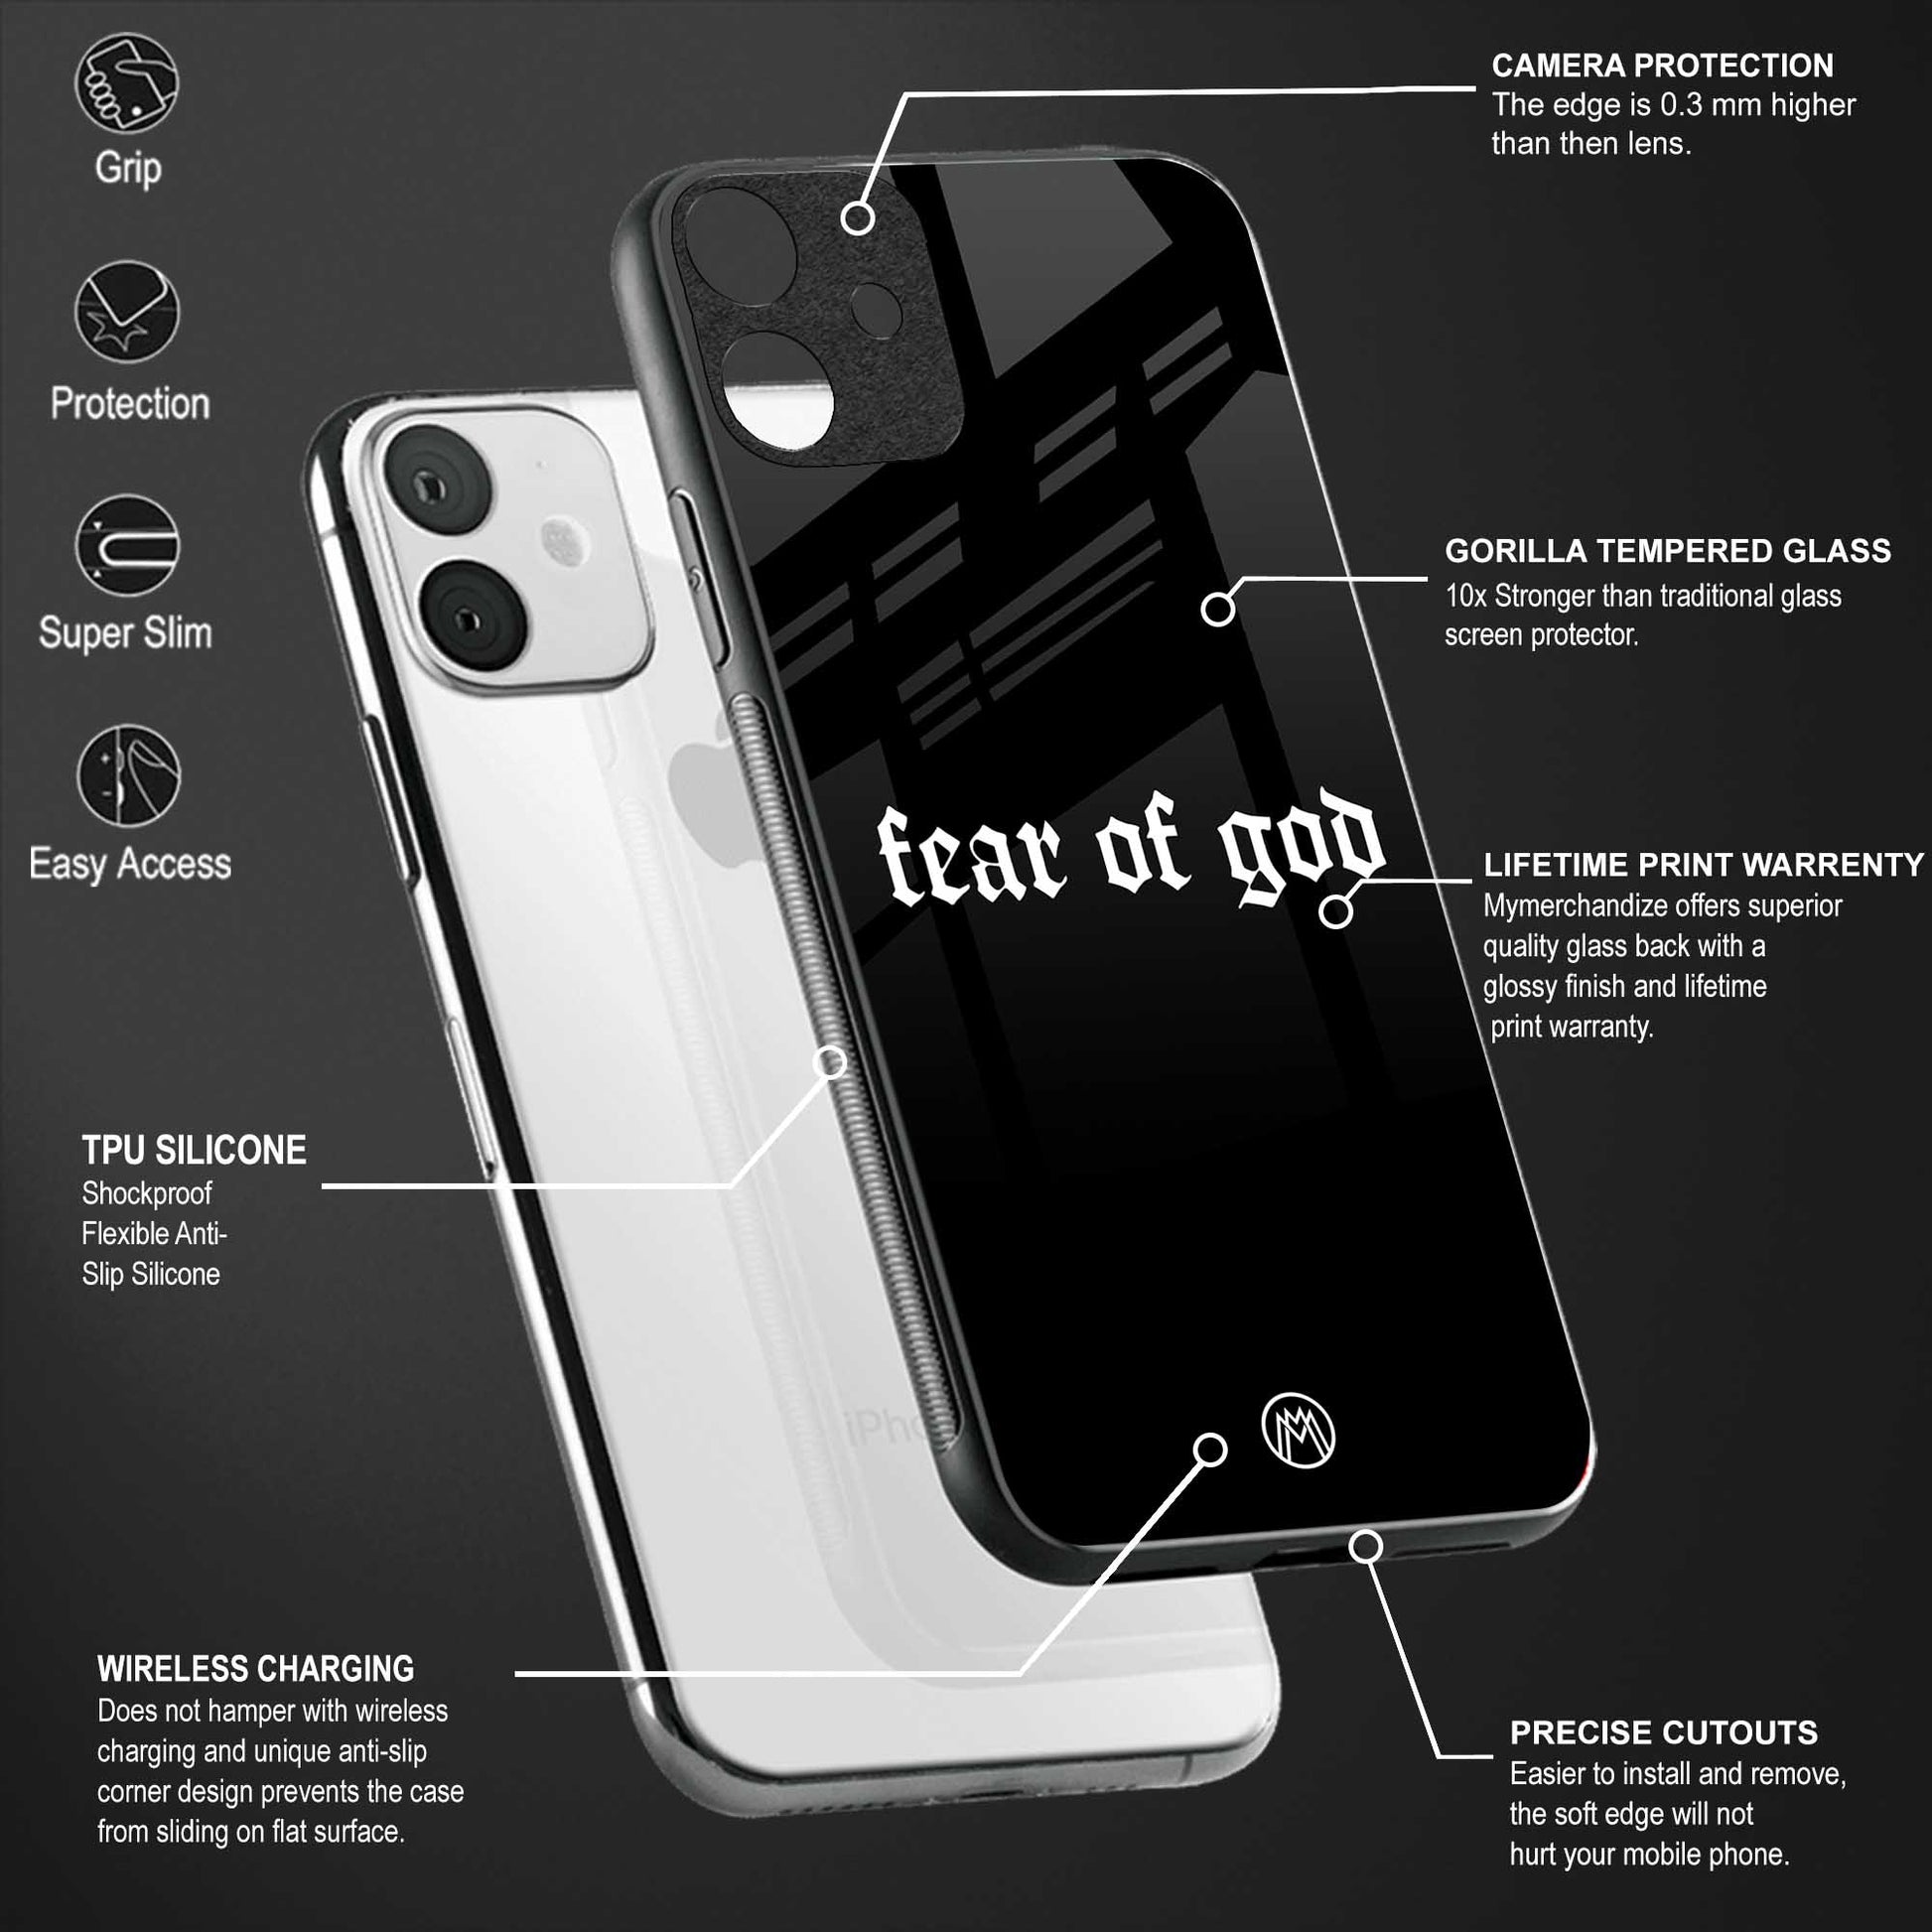 fear of god phone cover for realme 2